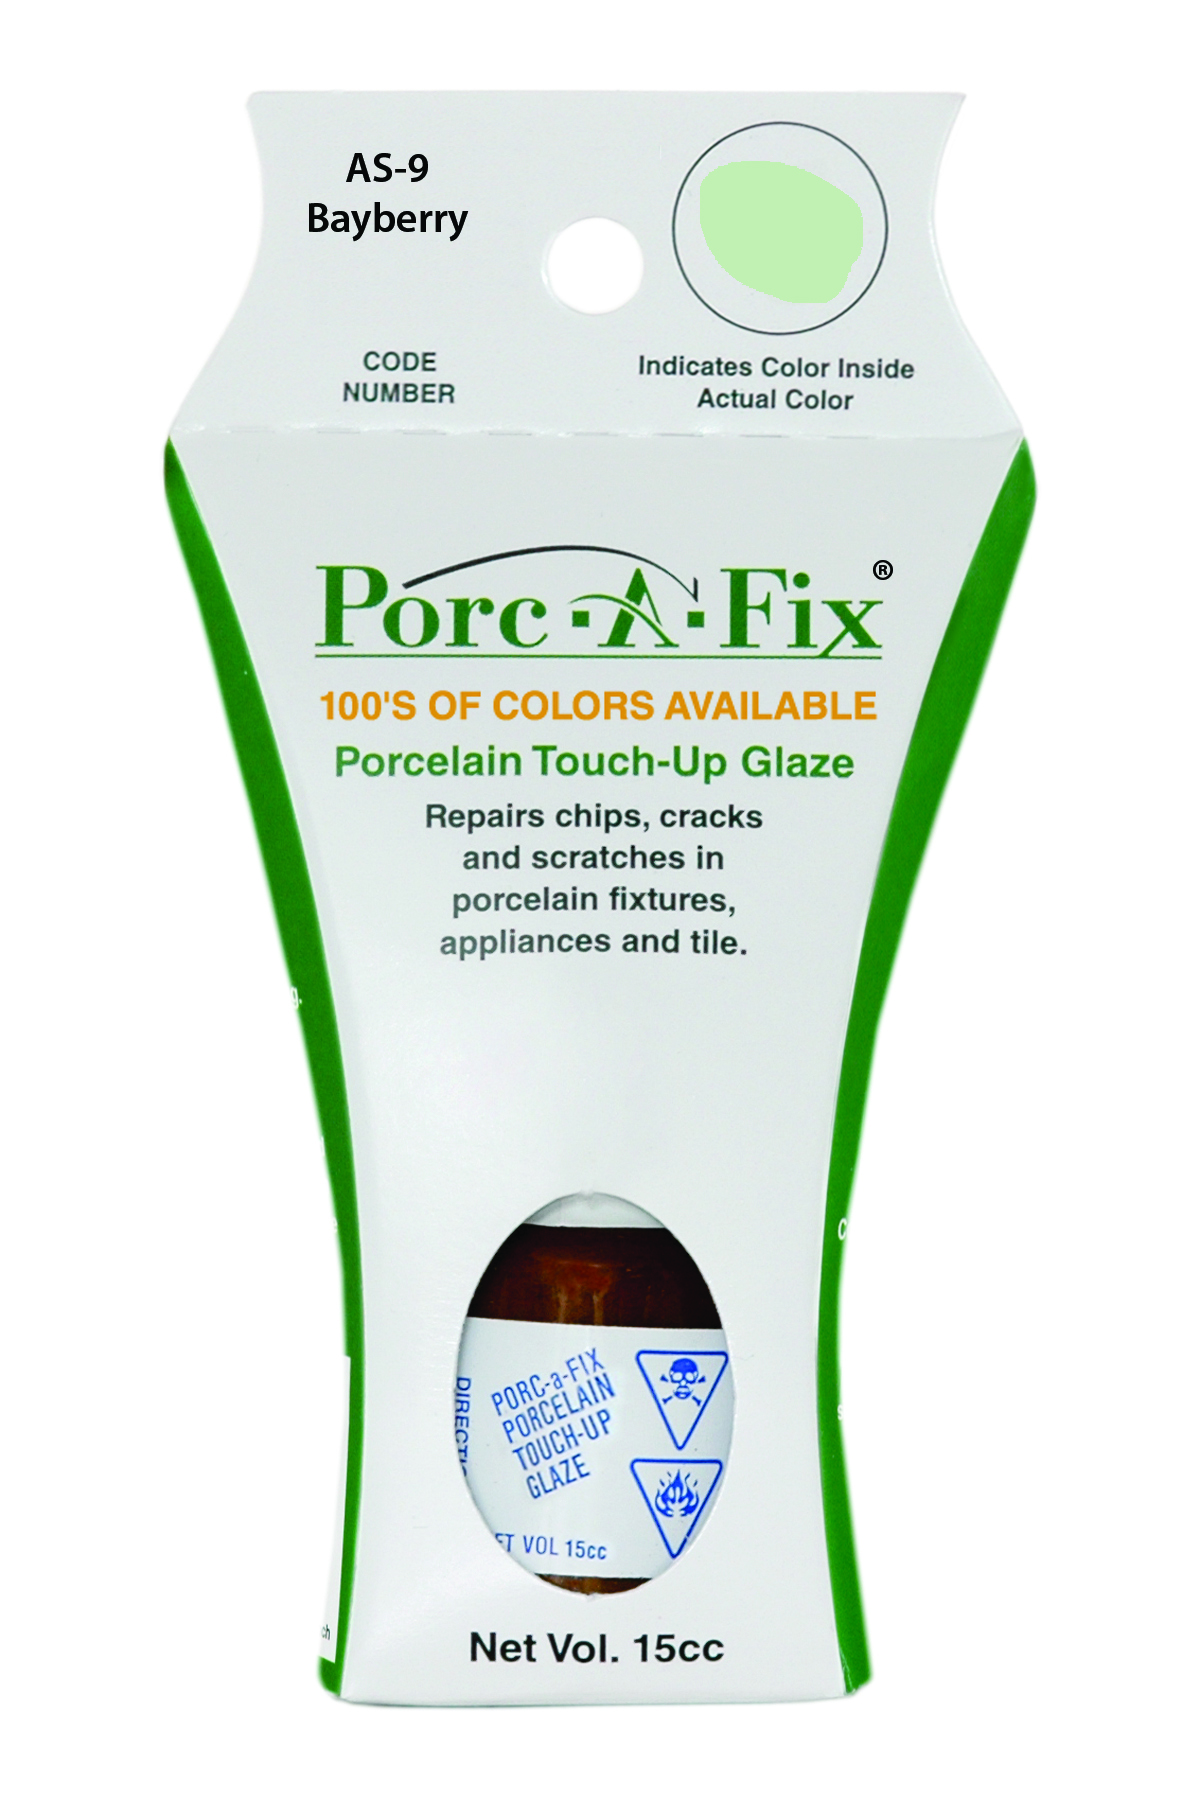 Fixture-Fix | AS-9 | Porc-A-Fix Touch-Up Glaze American Standard Bayberry - Compatible with American Standard 070900-0230A Touch Up Paint Kit - BAYBERRY